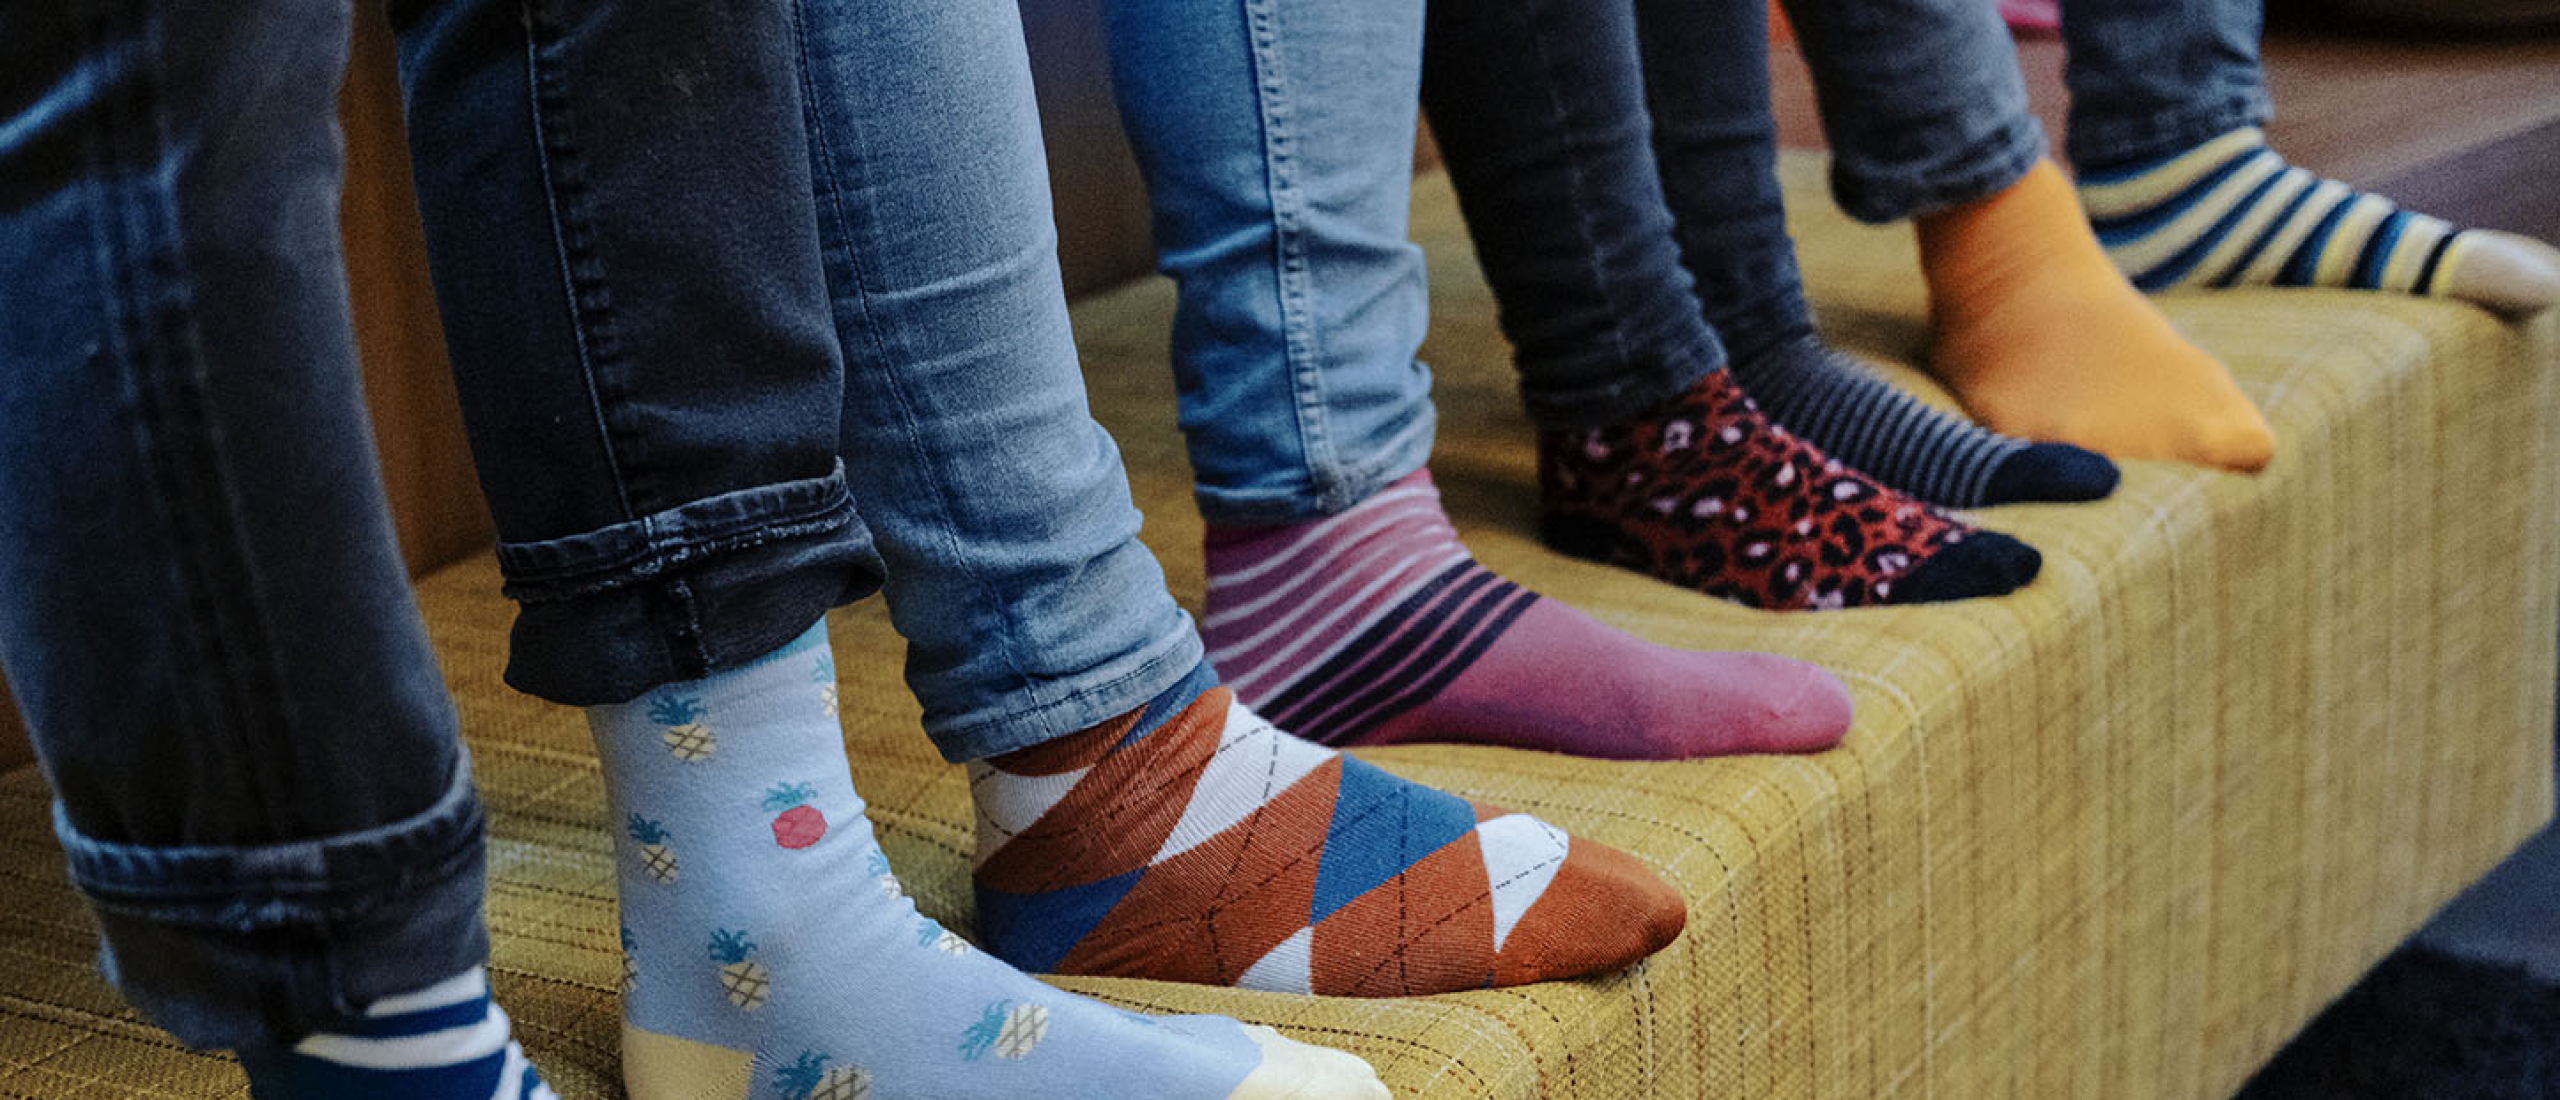 Sustainability with Socks: Do socks have to live in pairs?